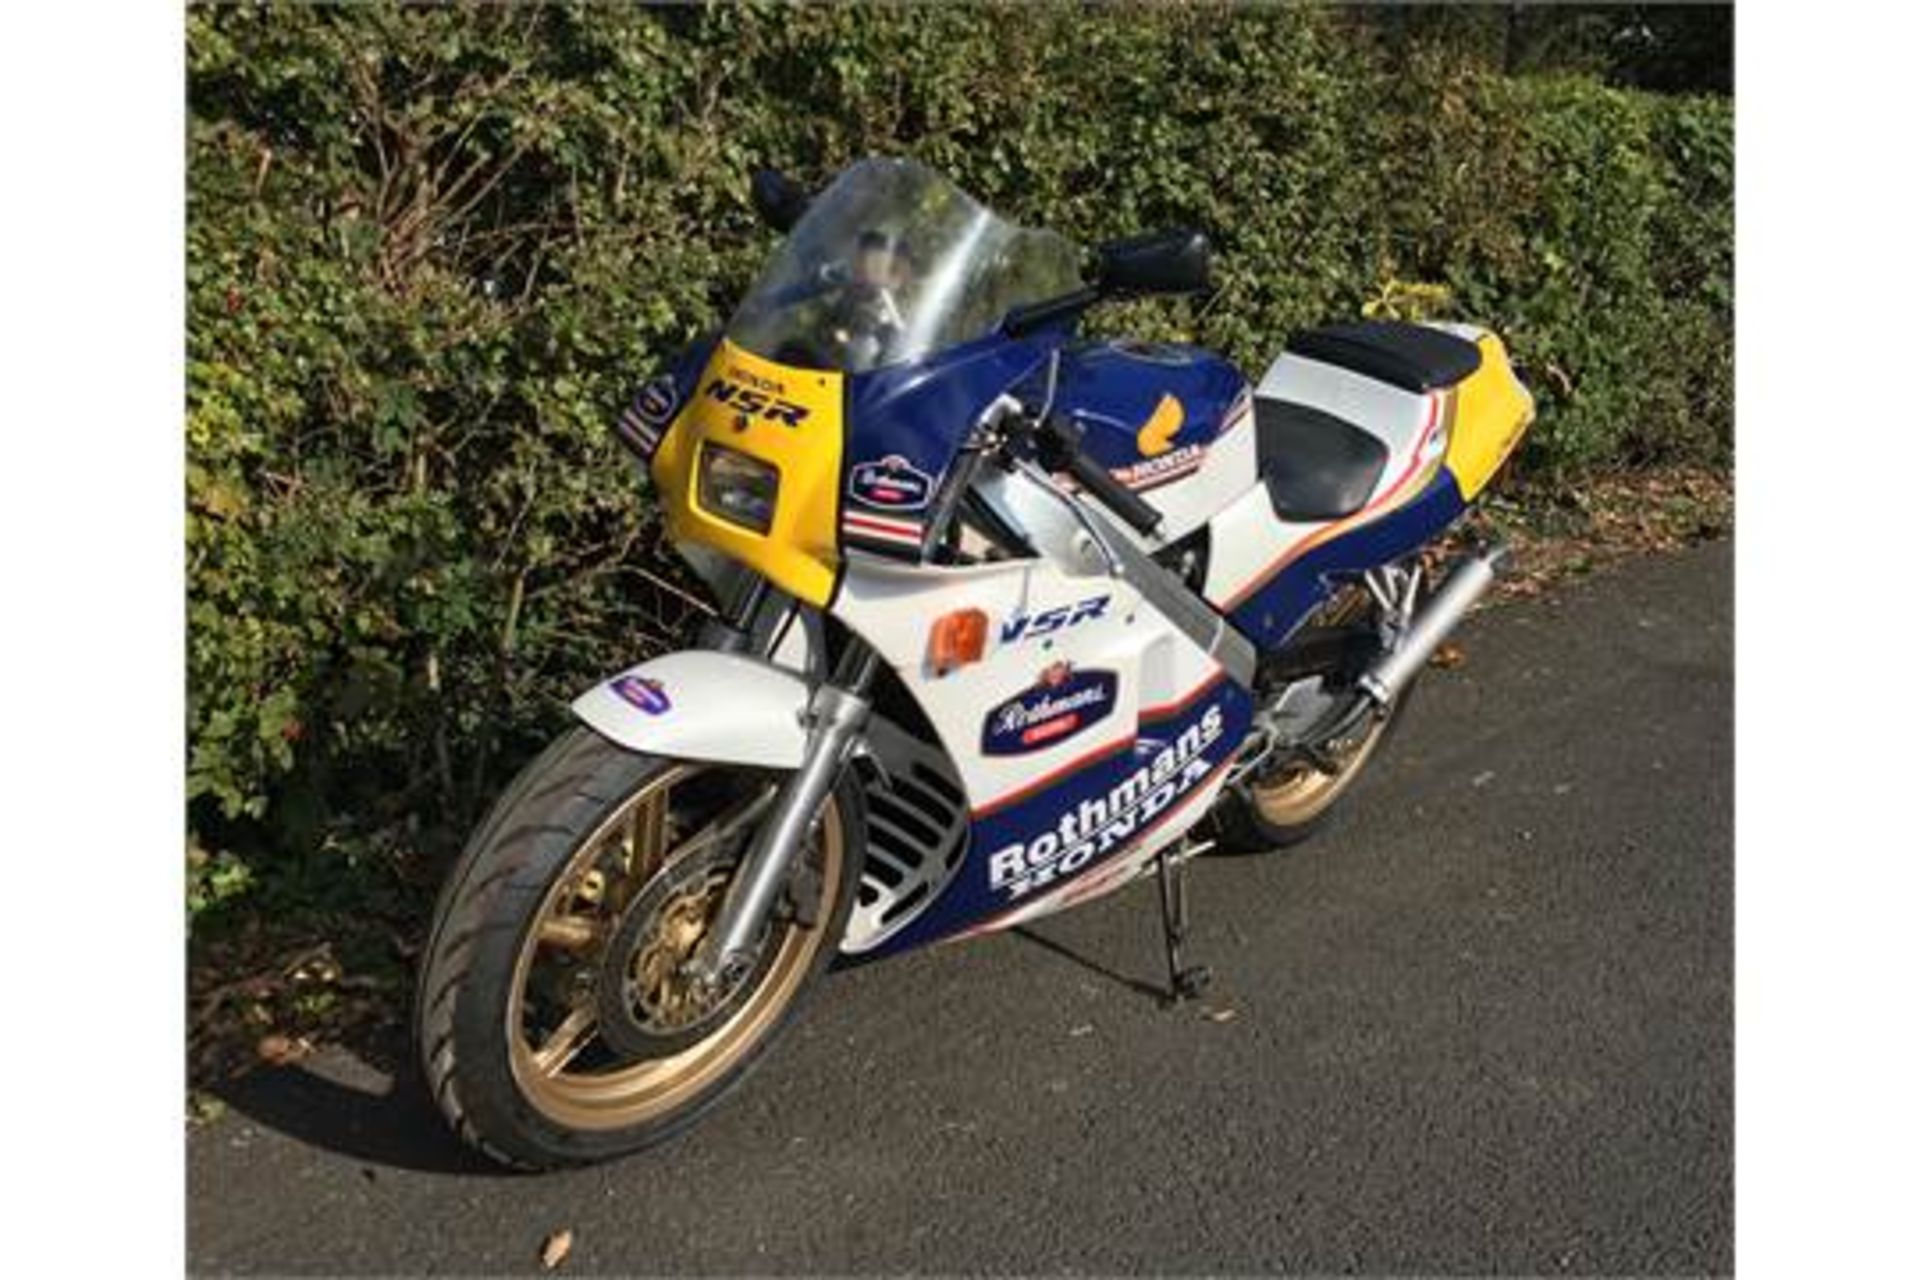 1988 Honda NSR250R SP RJ4 Rothmans Only 5,000kms From New - Image 5 of 9